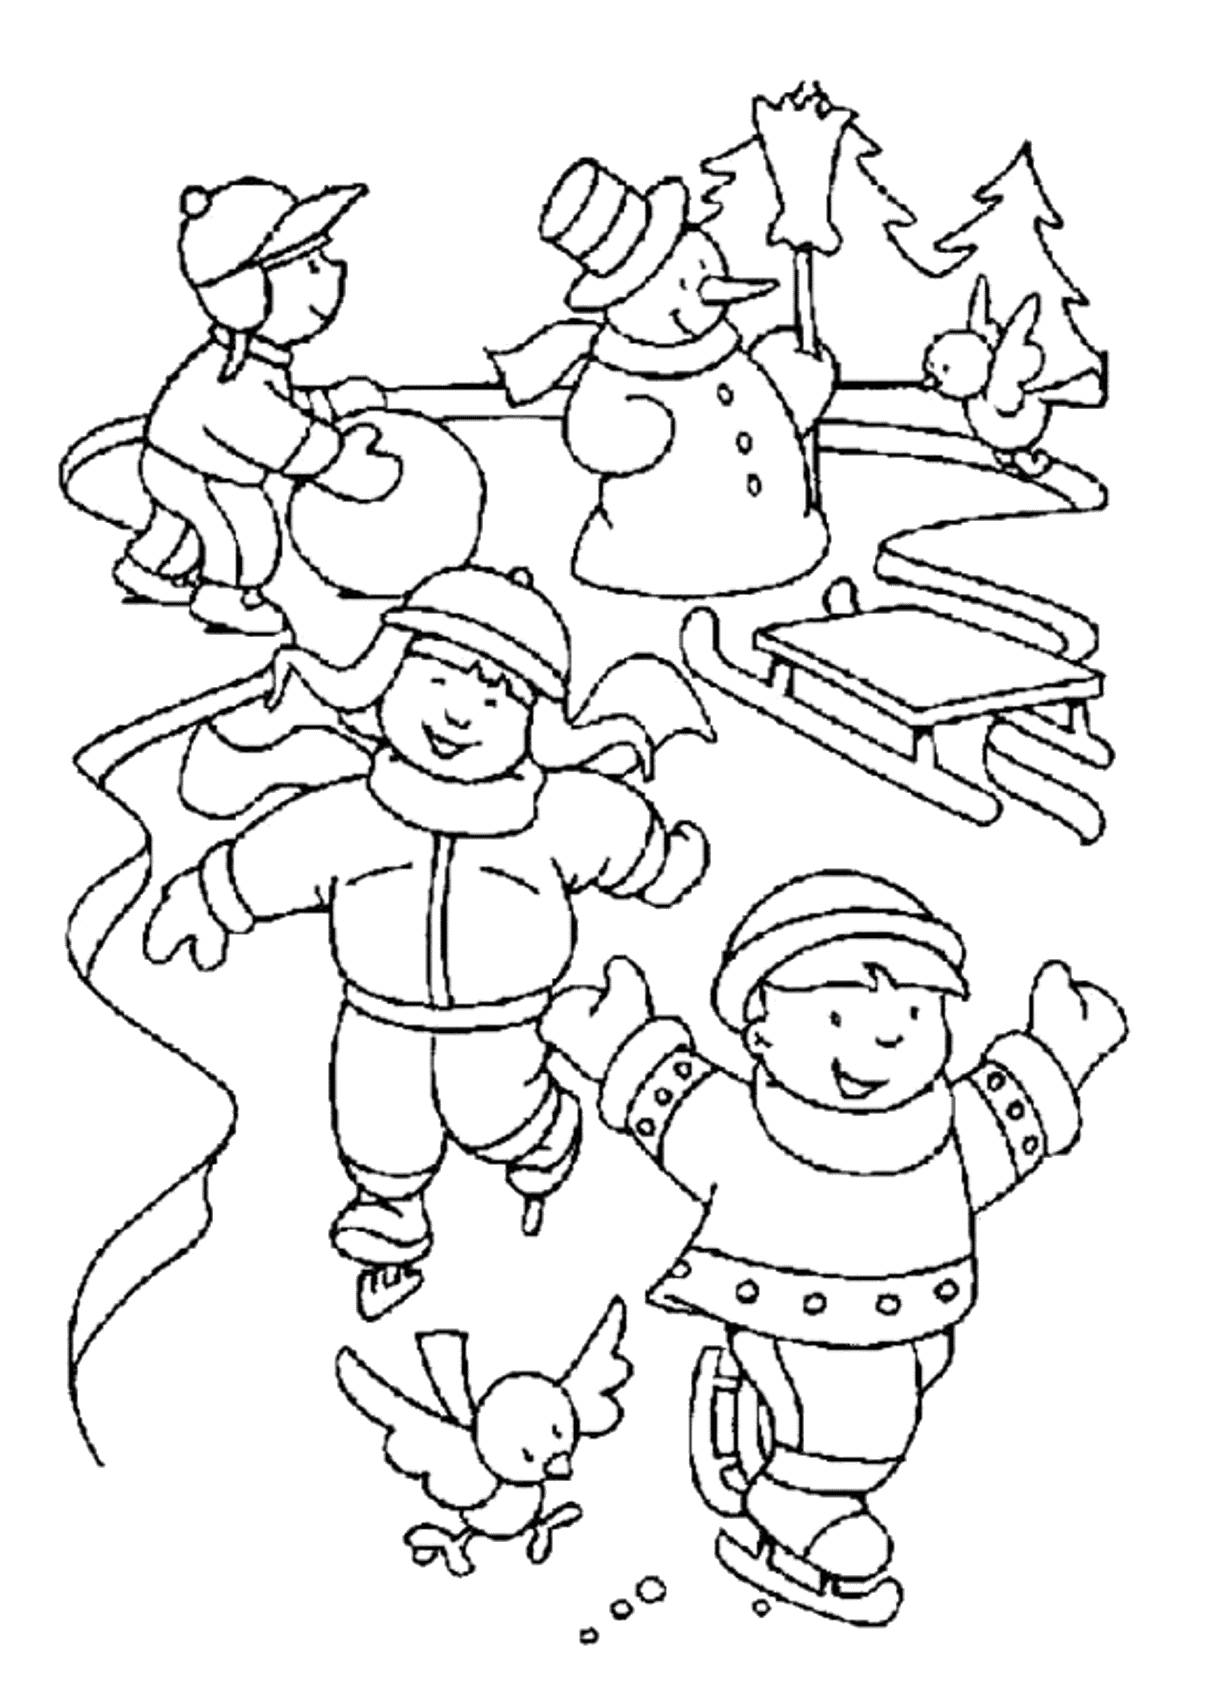 Glittering snowman coloring page